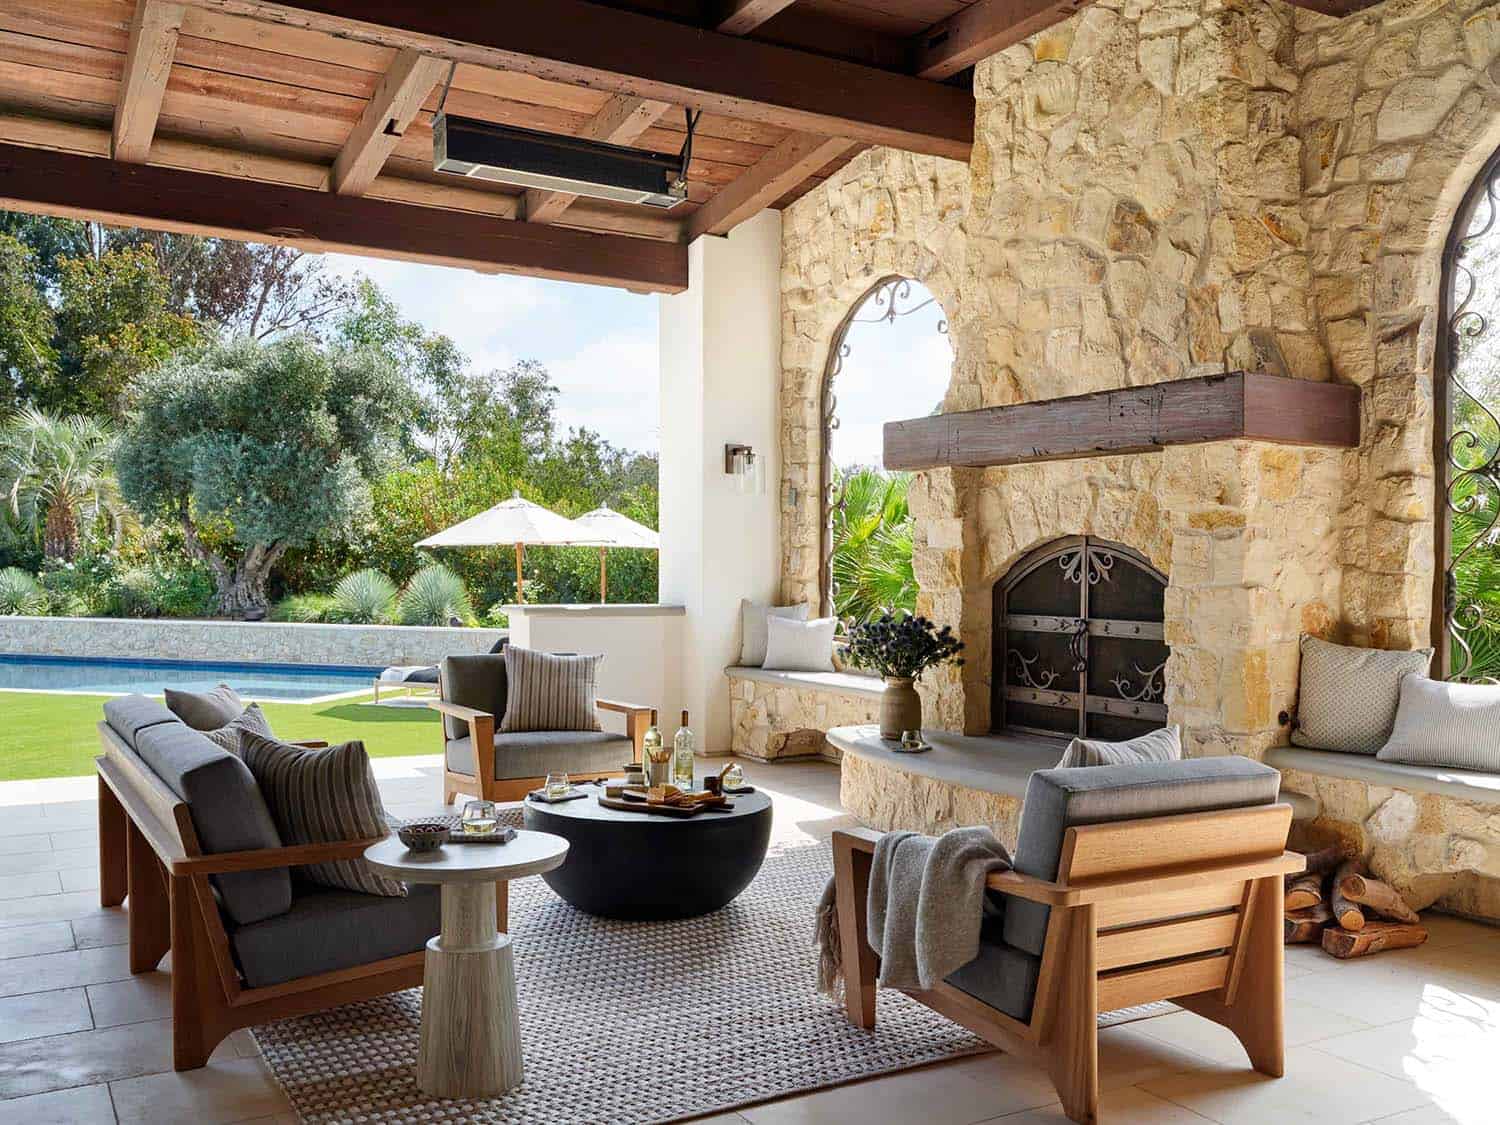 spanish-style-covered-patio-with-a-fireplace